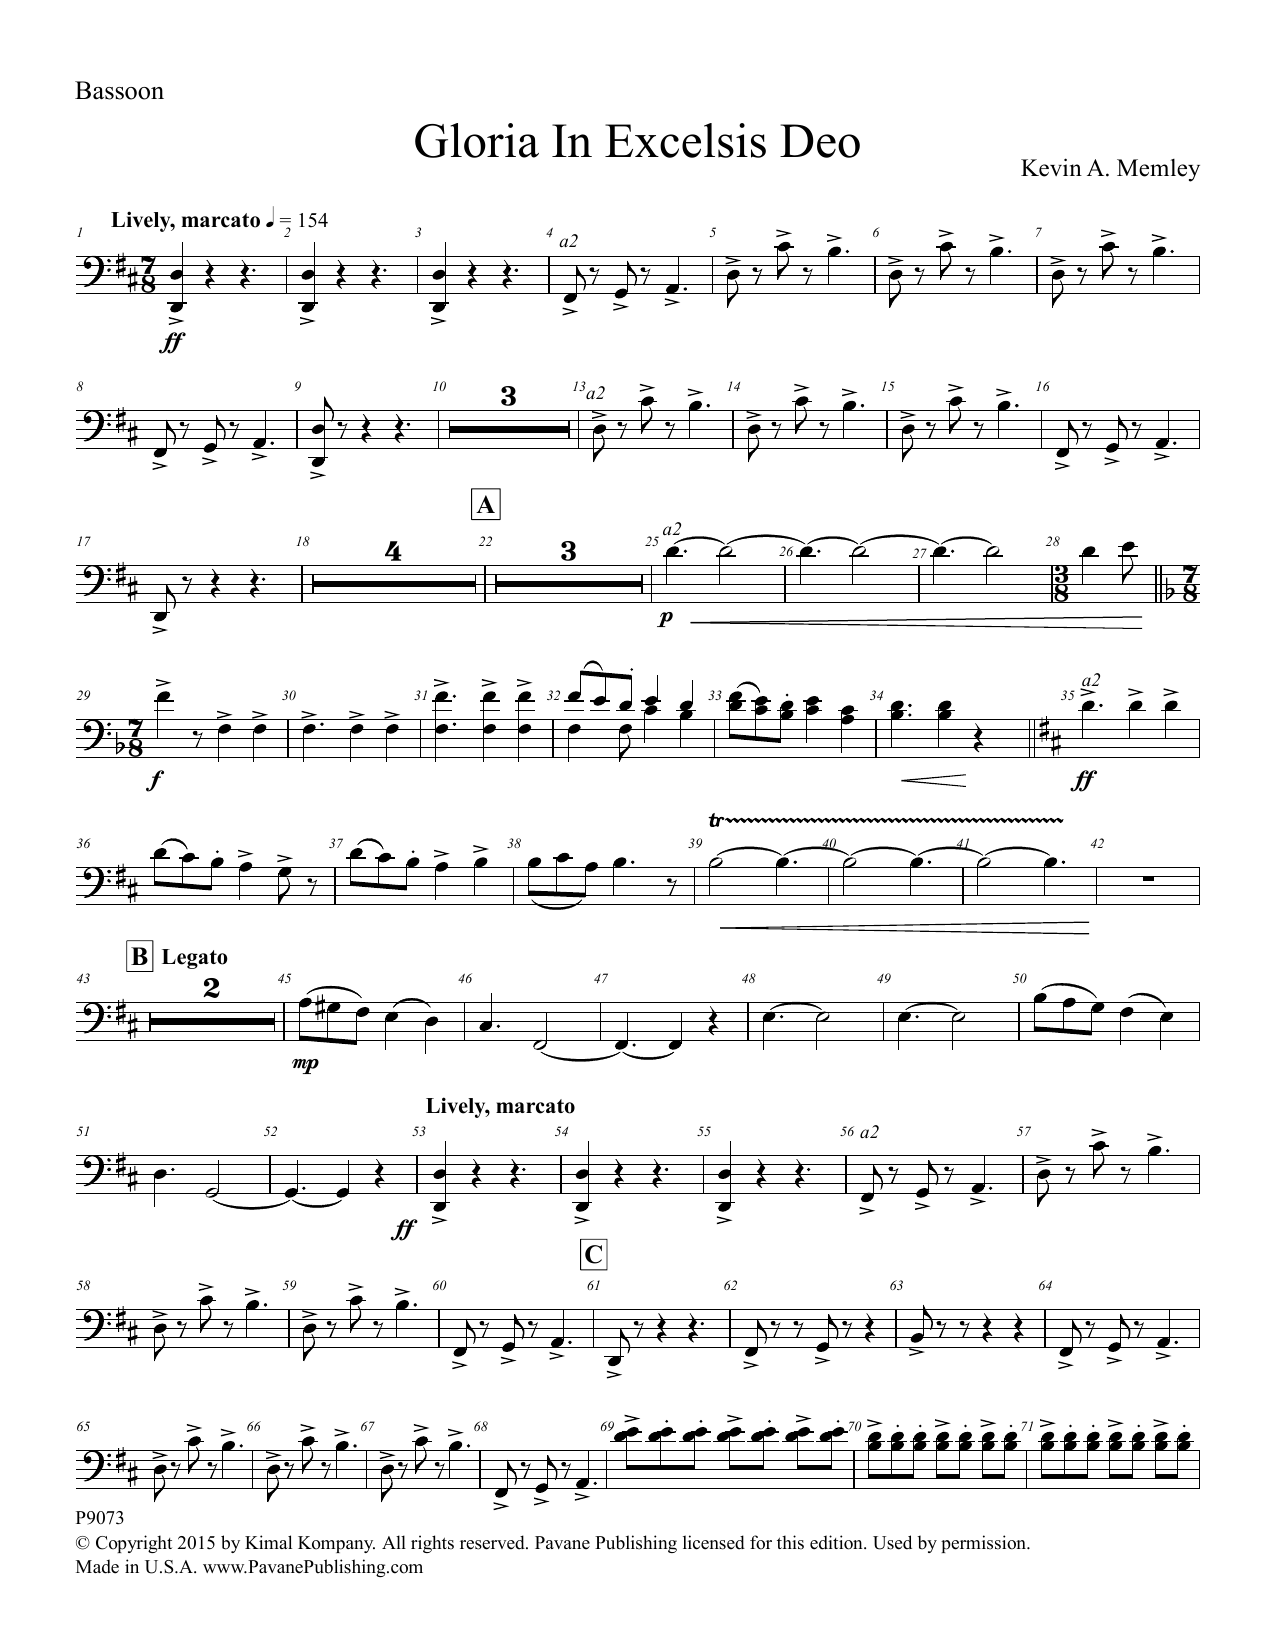 Download Kevin A. Memley Gloria in Excelsis Deo - Bassoon Sheet Music